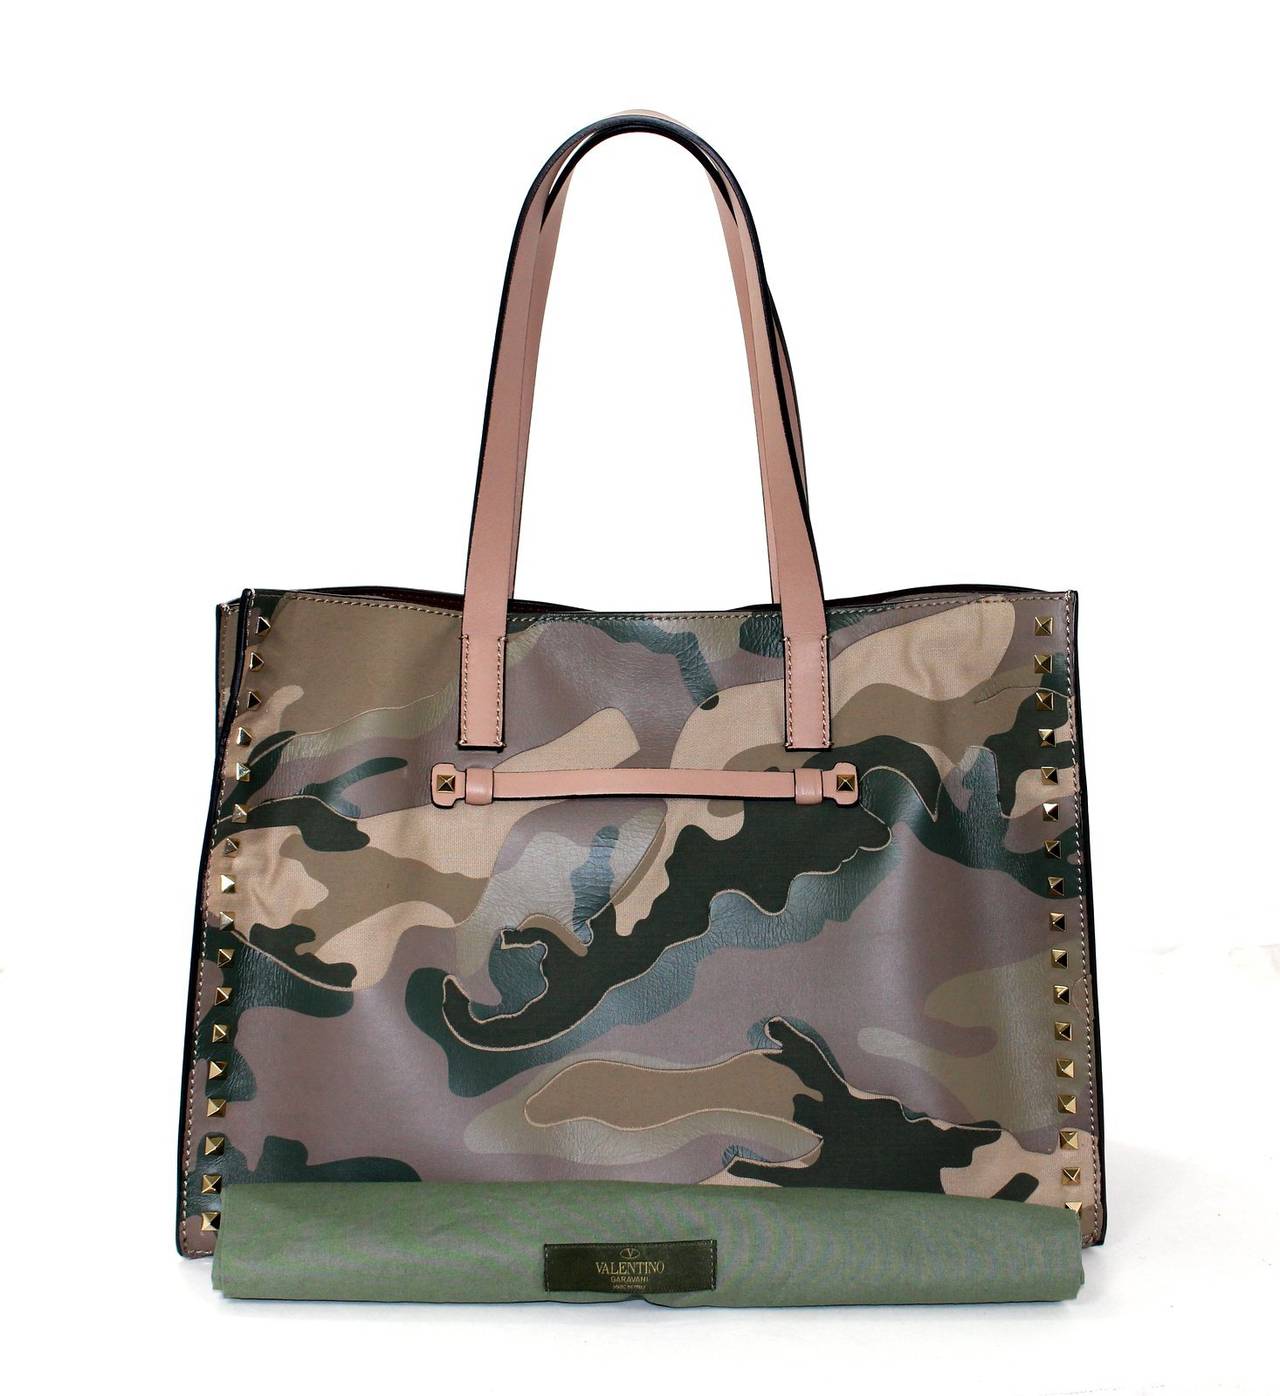 Valentino Rock Stud Tote- Camo Green Leather and Canvas 4